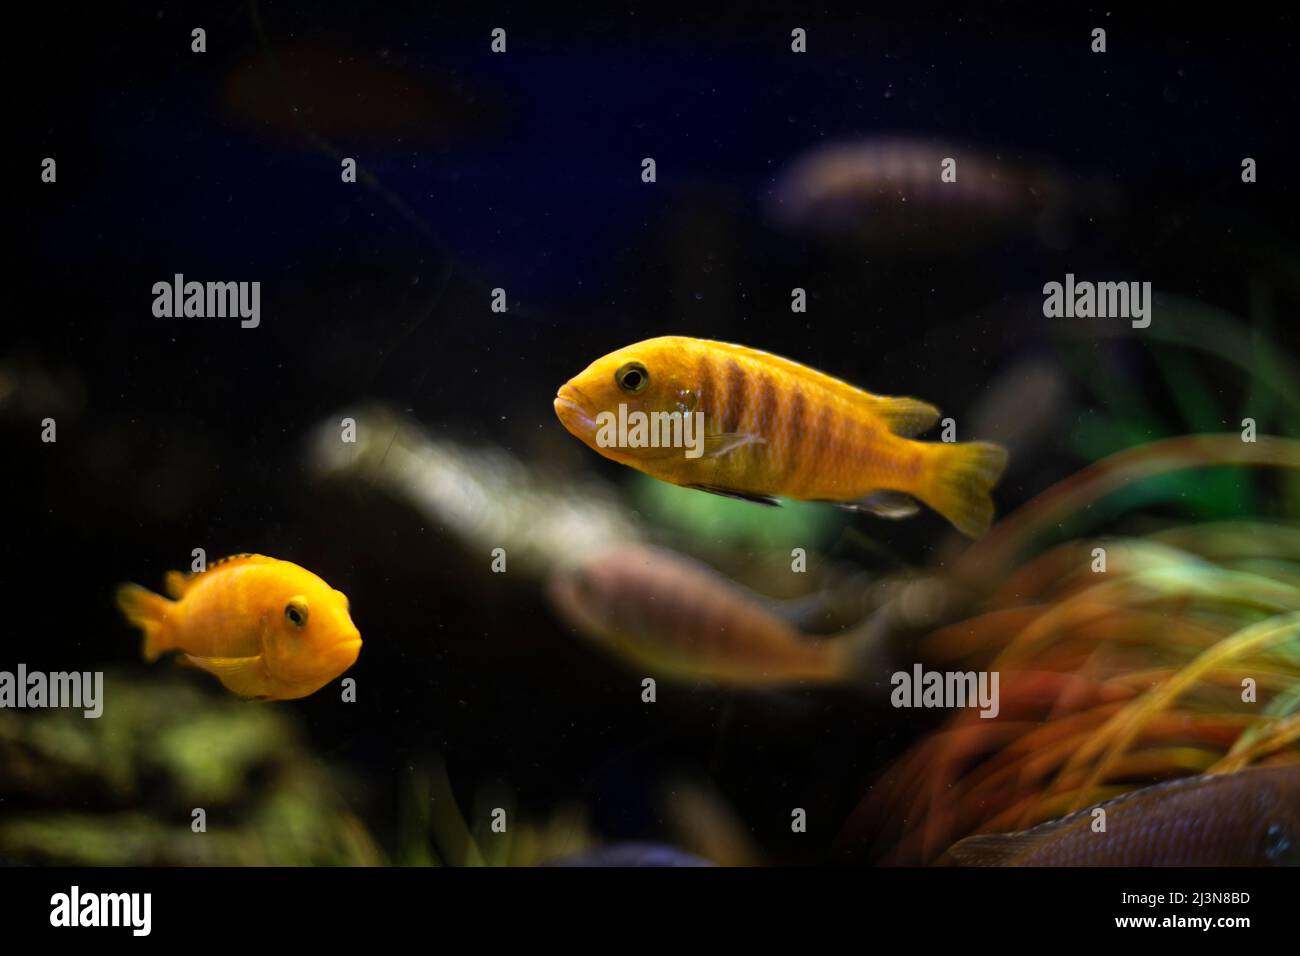 Fish in water. Yellow fish in aquarium. Pets in special pond. Marine fauna. Stock Photo